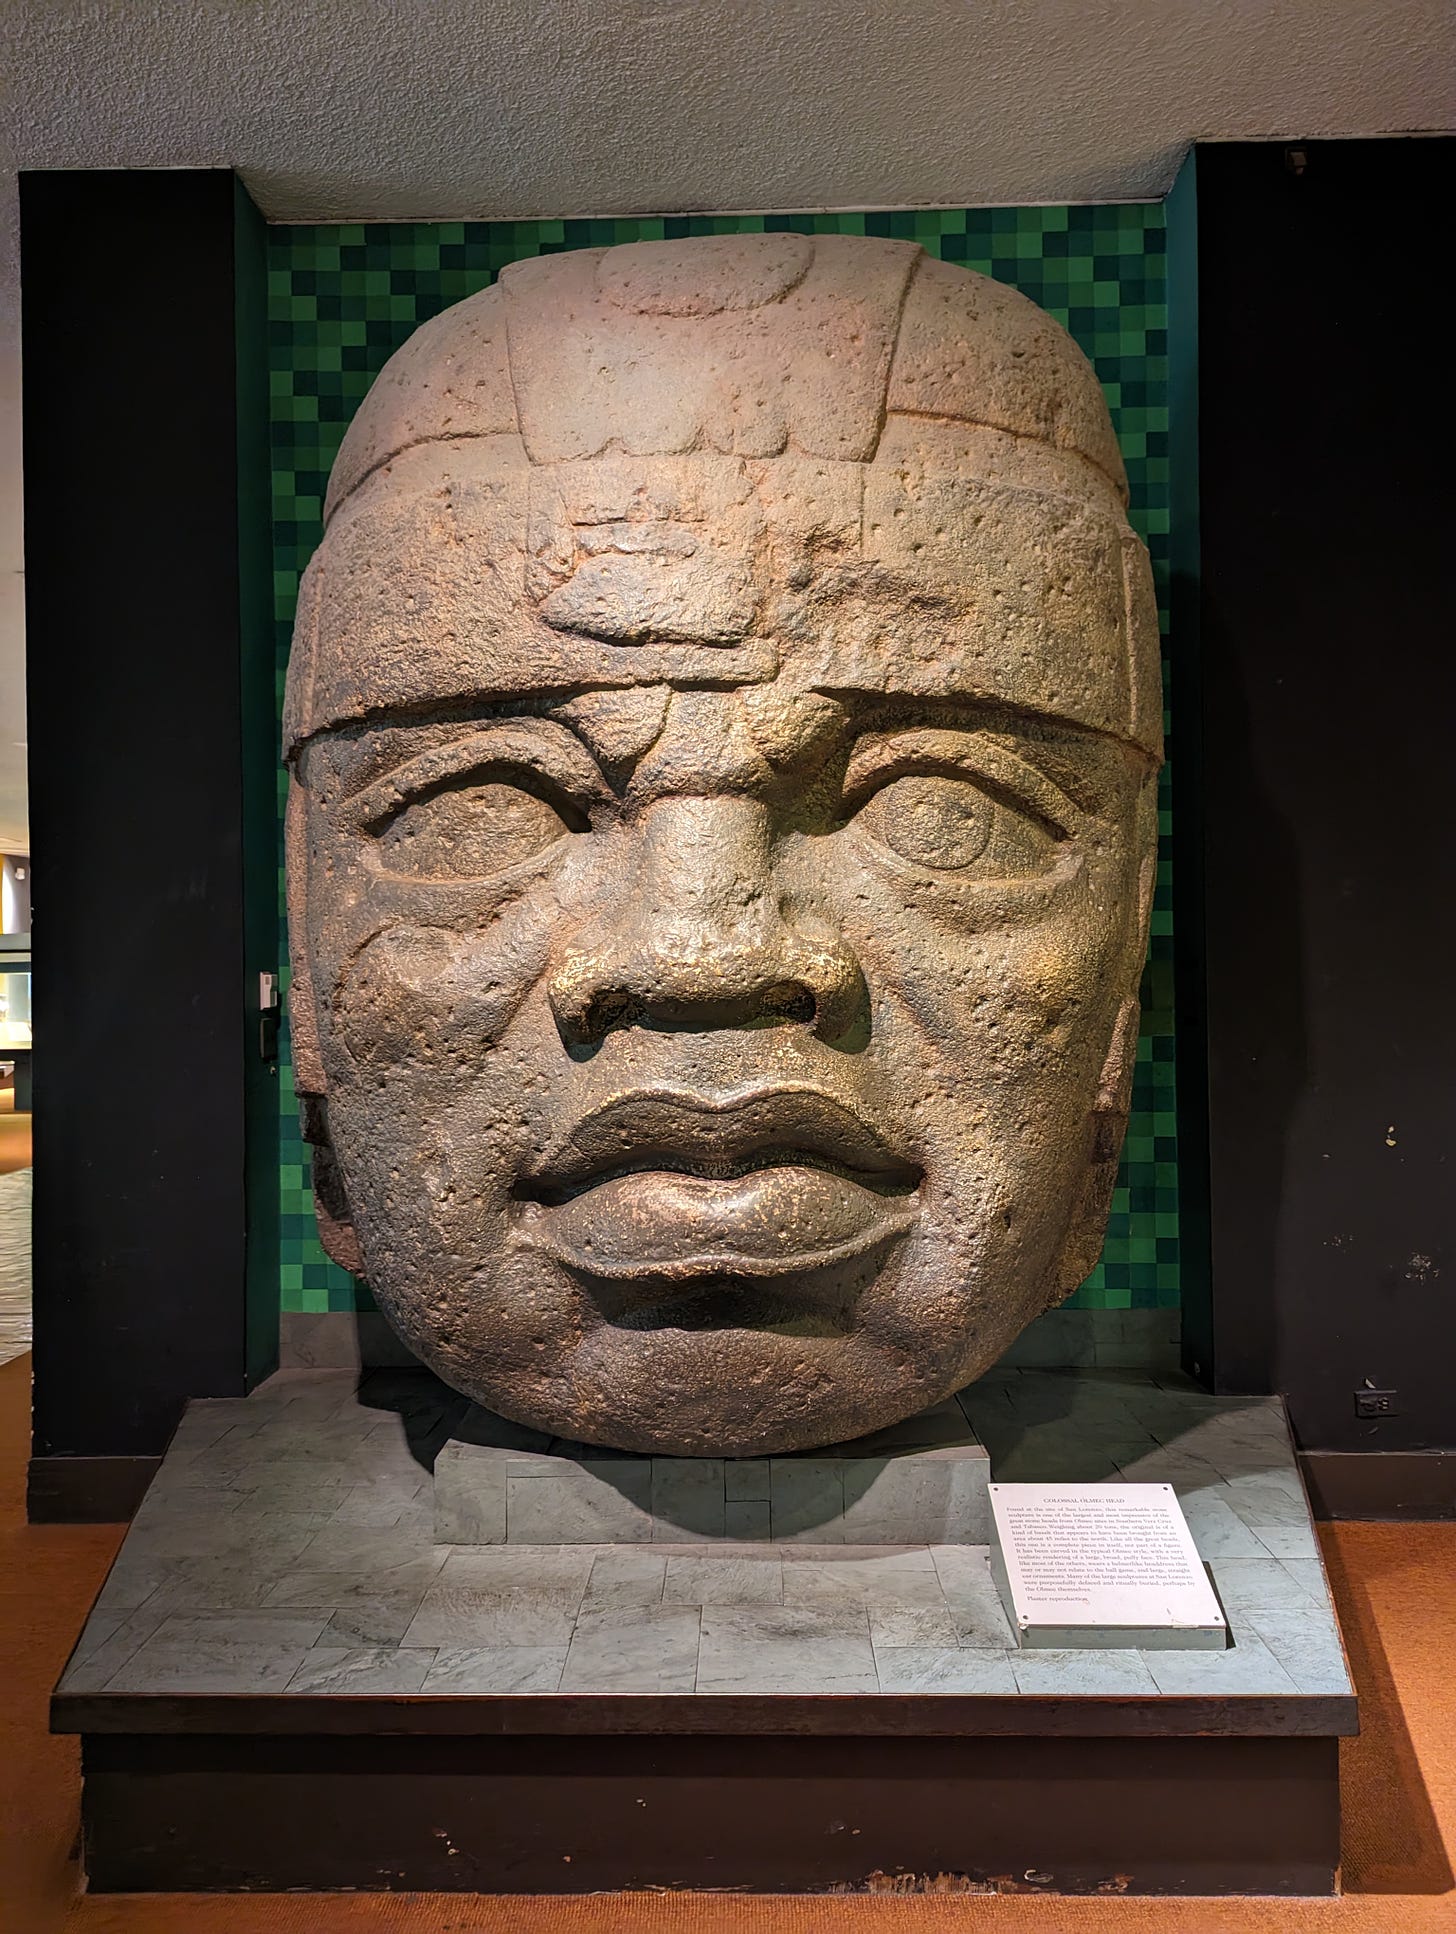 Plaster reproduction of a colossal Olmec head from San Lorenzo, Mexico. The head bears the hallmarks of traditional Olmec carving: a broad, puffy face, realistic features, a helmet or headdress, and ear decorations.